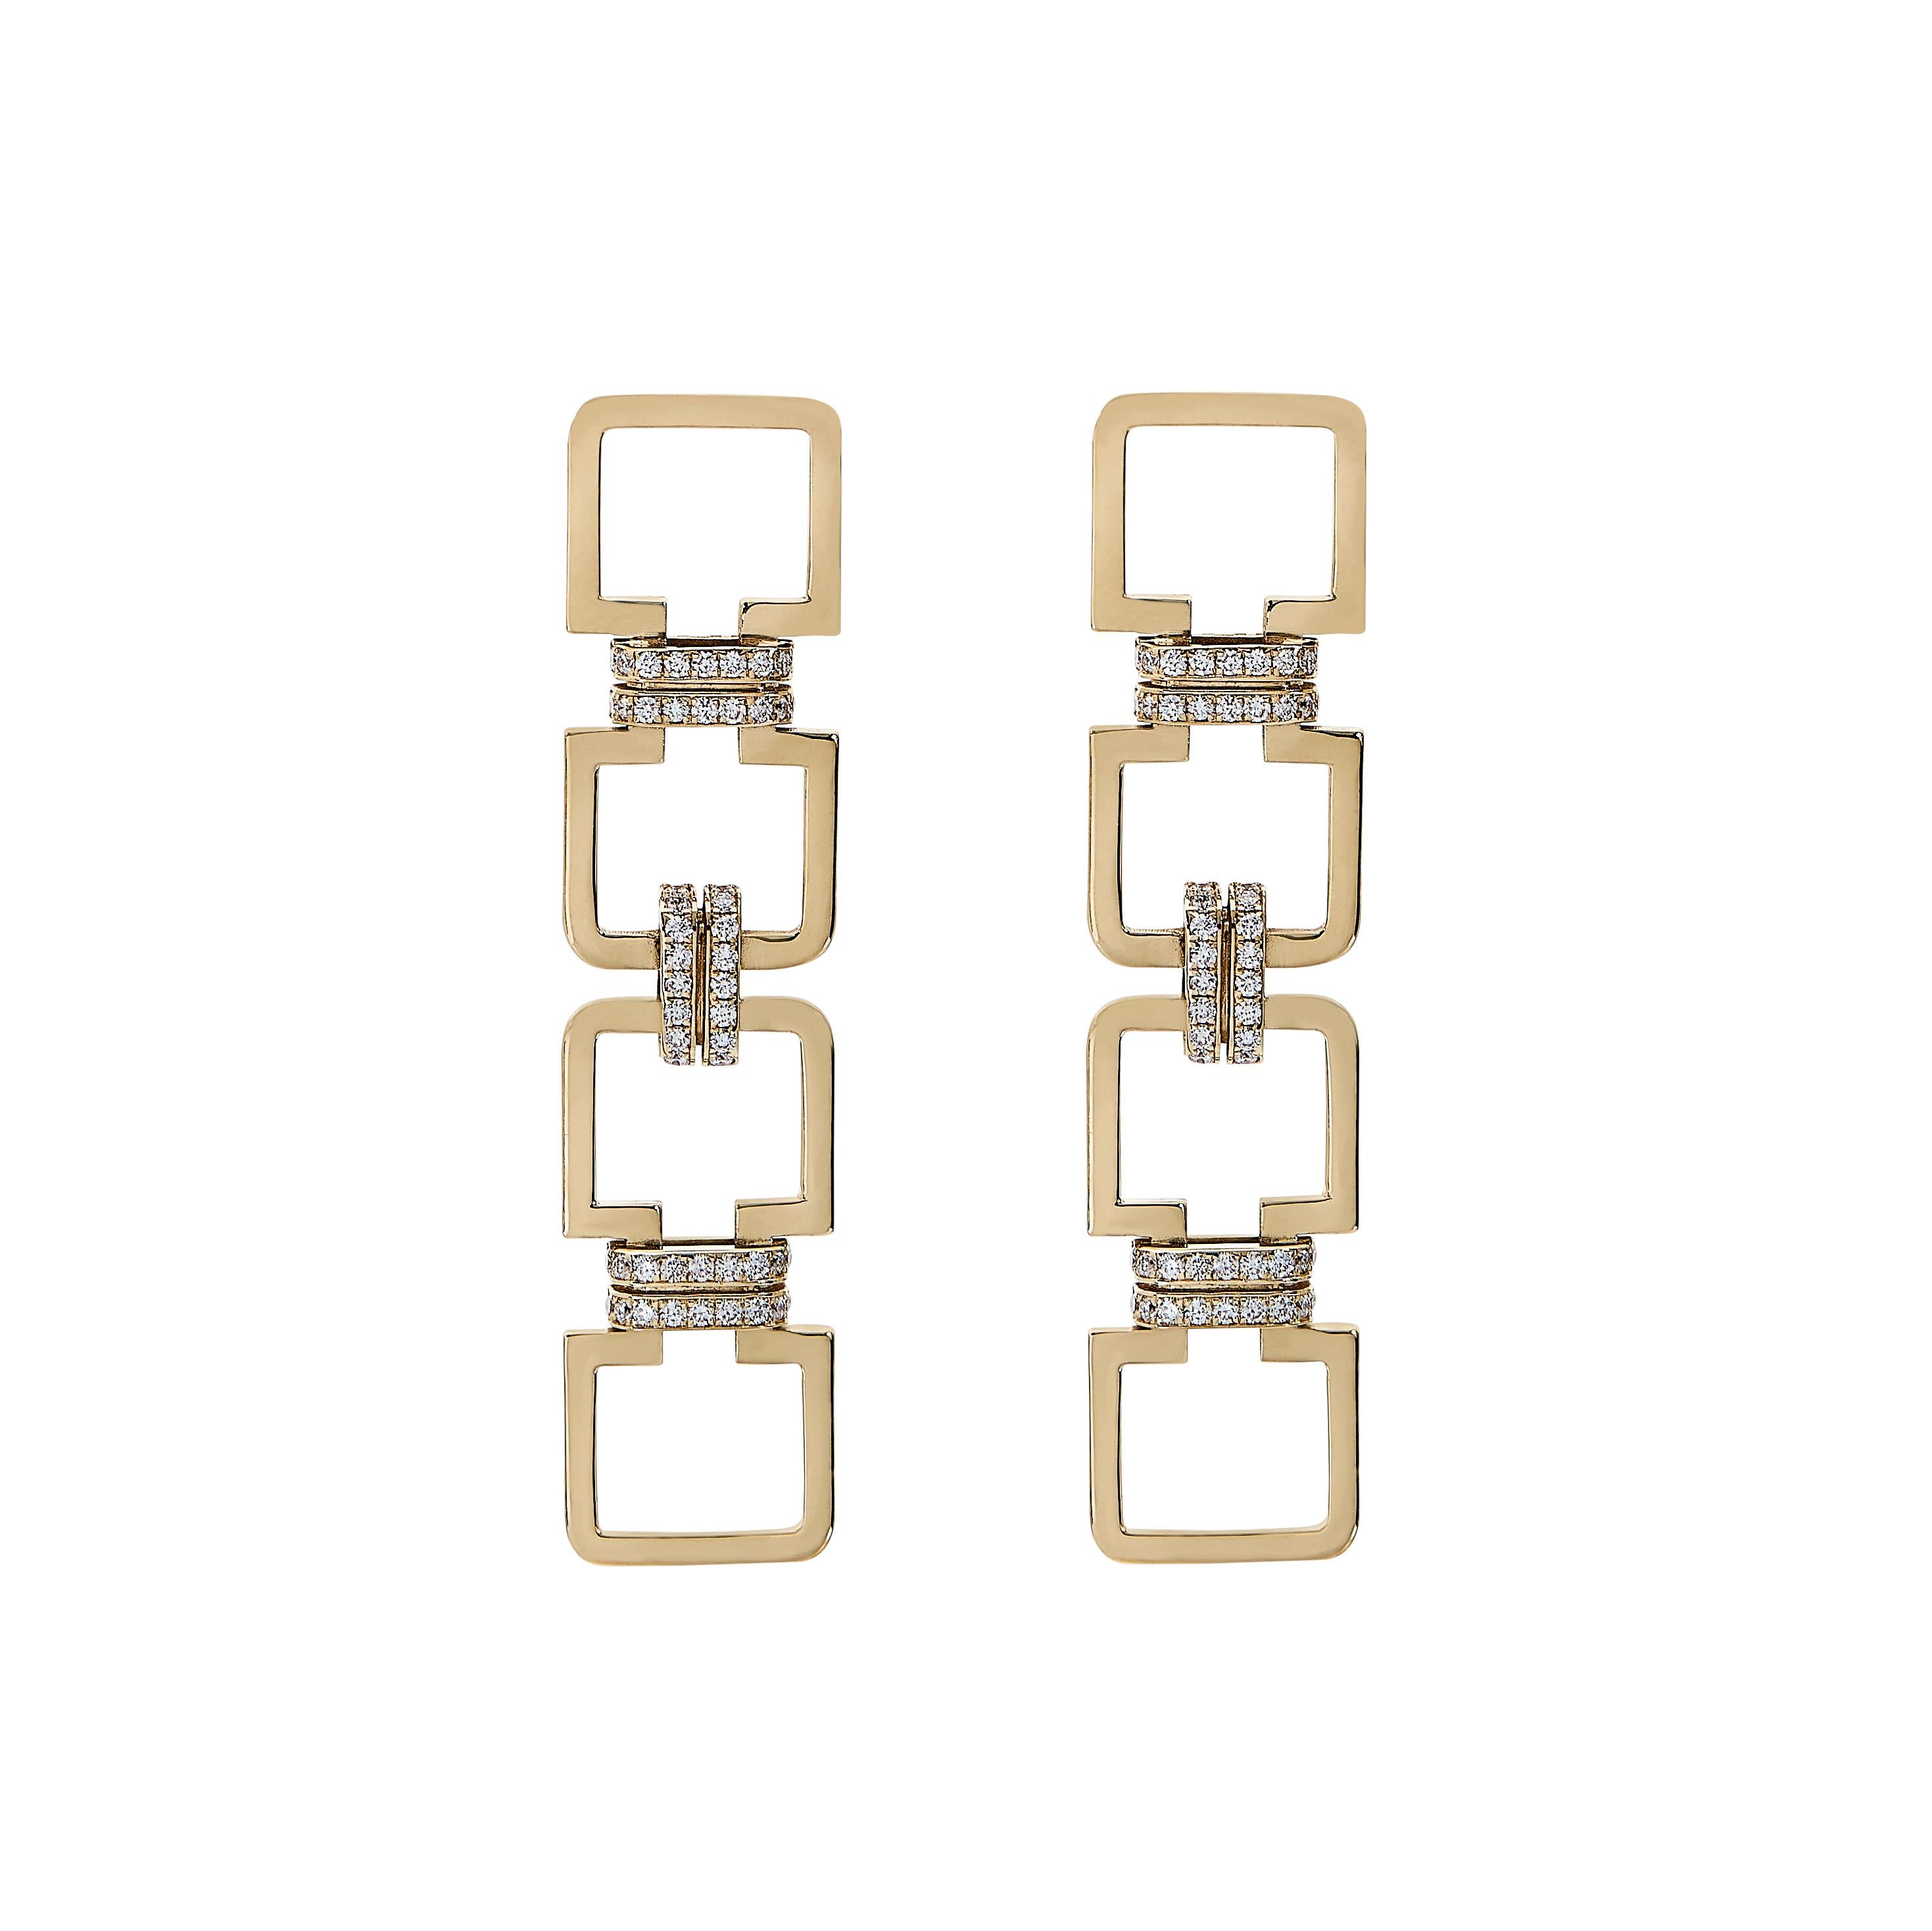 These earrings from POLINA ELLIS' ENOSIS collection are handcrafted in 18K raw white gold with 0,49ct white brilliant cut diamonds.
Length: 4,80cm
Width: 1,10cm